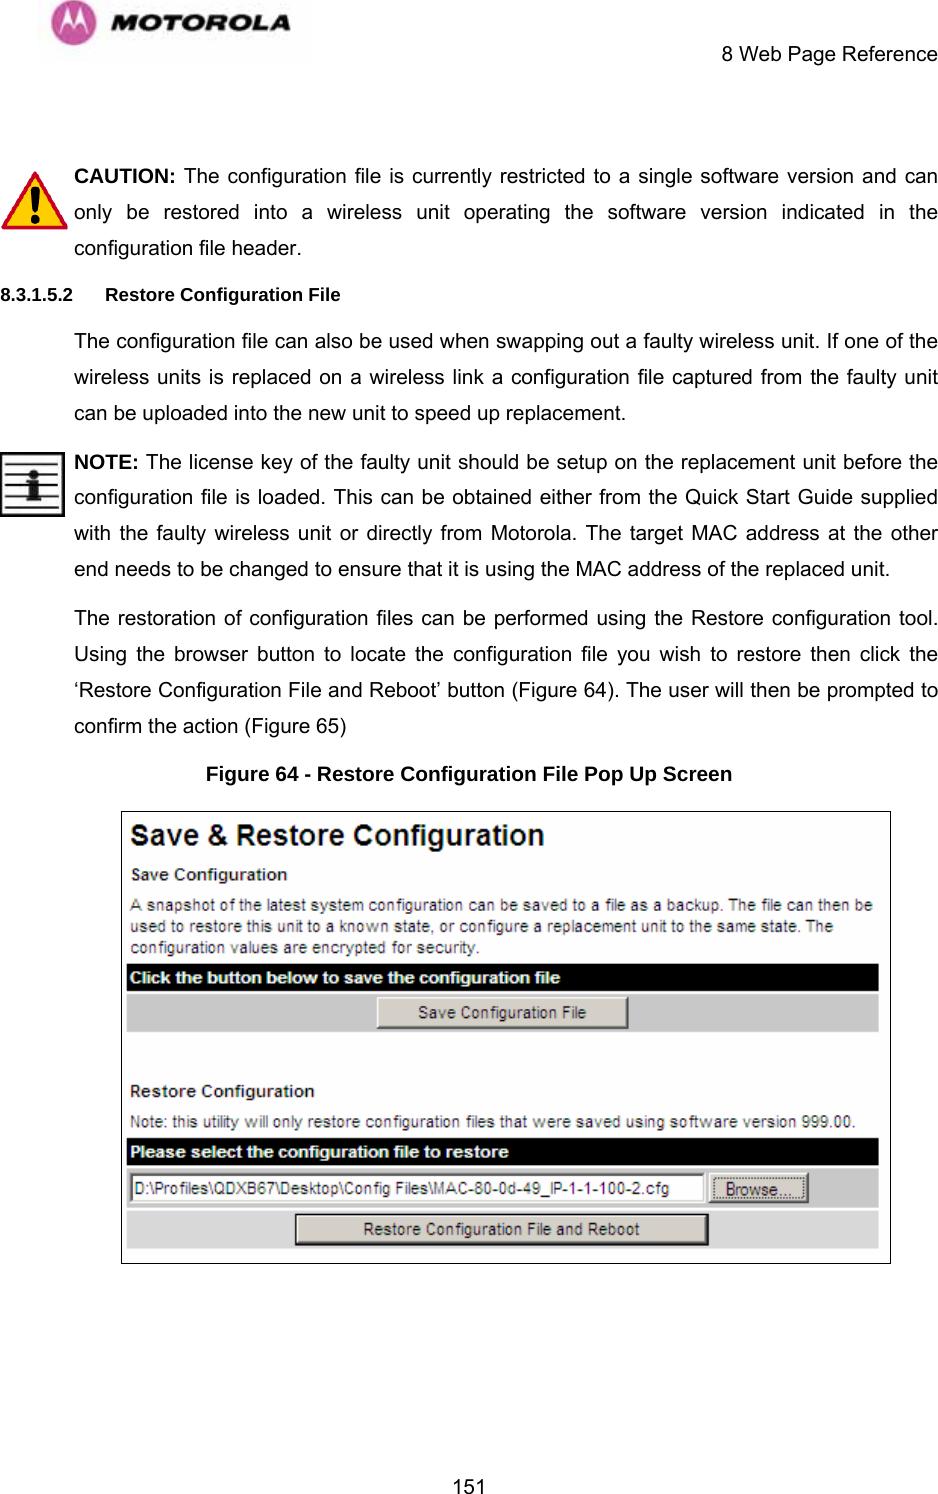     8 Web Page Reference  151 CAUTION: The configuration file is currently restricted to a single software version and can only be restored into a wireless unit operating the software version indicated in the configuration file header. 8.3.1.5.2 Restore Configuration File The configuration file can also be used when swapping out a faulty wireless unit. If one of the wireless units is replaced on a wireless link a configuration file captured from the faulty unit can be uploaded into the new unit to speed up replacement.  NOTE: The license key of the faulty unit should be setup on the replacement unit before the configuration file is loaded. This can be obtained either from the Quick Start Guide supplied with the faulty wireless unit or directly from Motorola. The target MAC address at the other end needs to be changed to ensure that it is using the MAC address of the replaced unit. The restoration of configuration files can be performed using the Restore configuration tool. Using the browser button to locate the configuration file you wish to restore then click the ‘Restore Configuration File and Reboot’ button (Figure 64). The user will then be prompted to confirm the action (Figure 65) Figure 64 - Restore Configuration File Pop Up Screen  